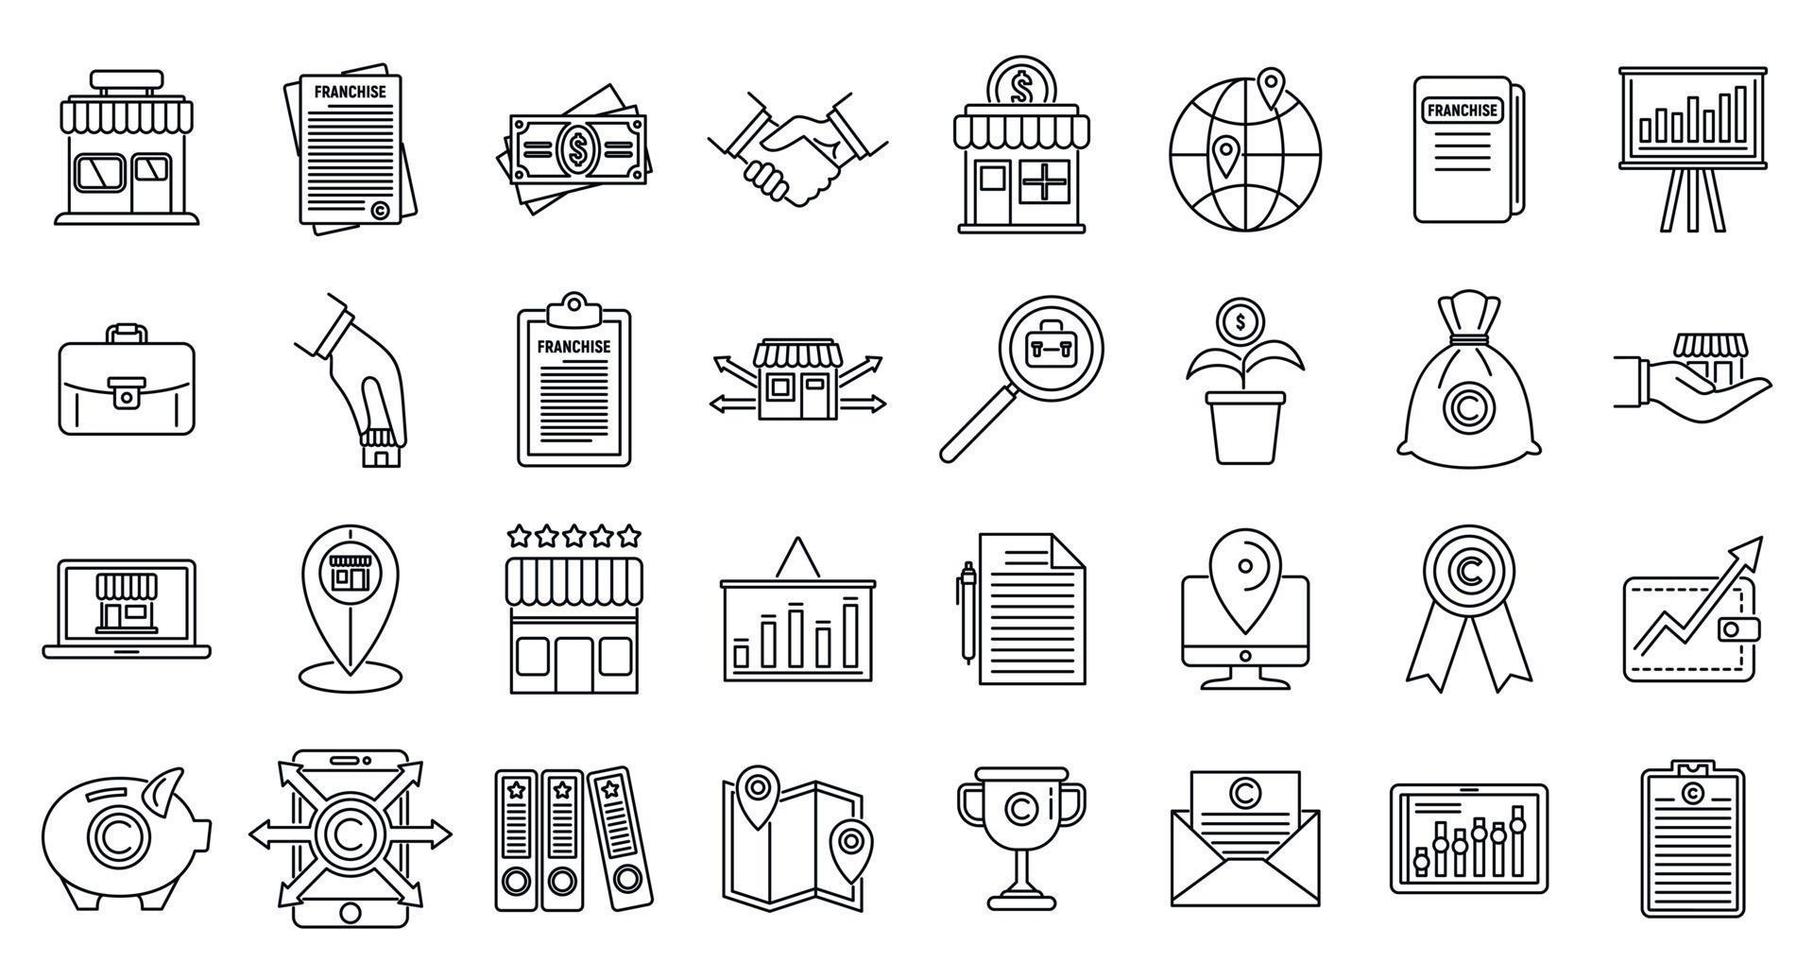 Franchise store icons set, outline style vector